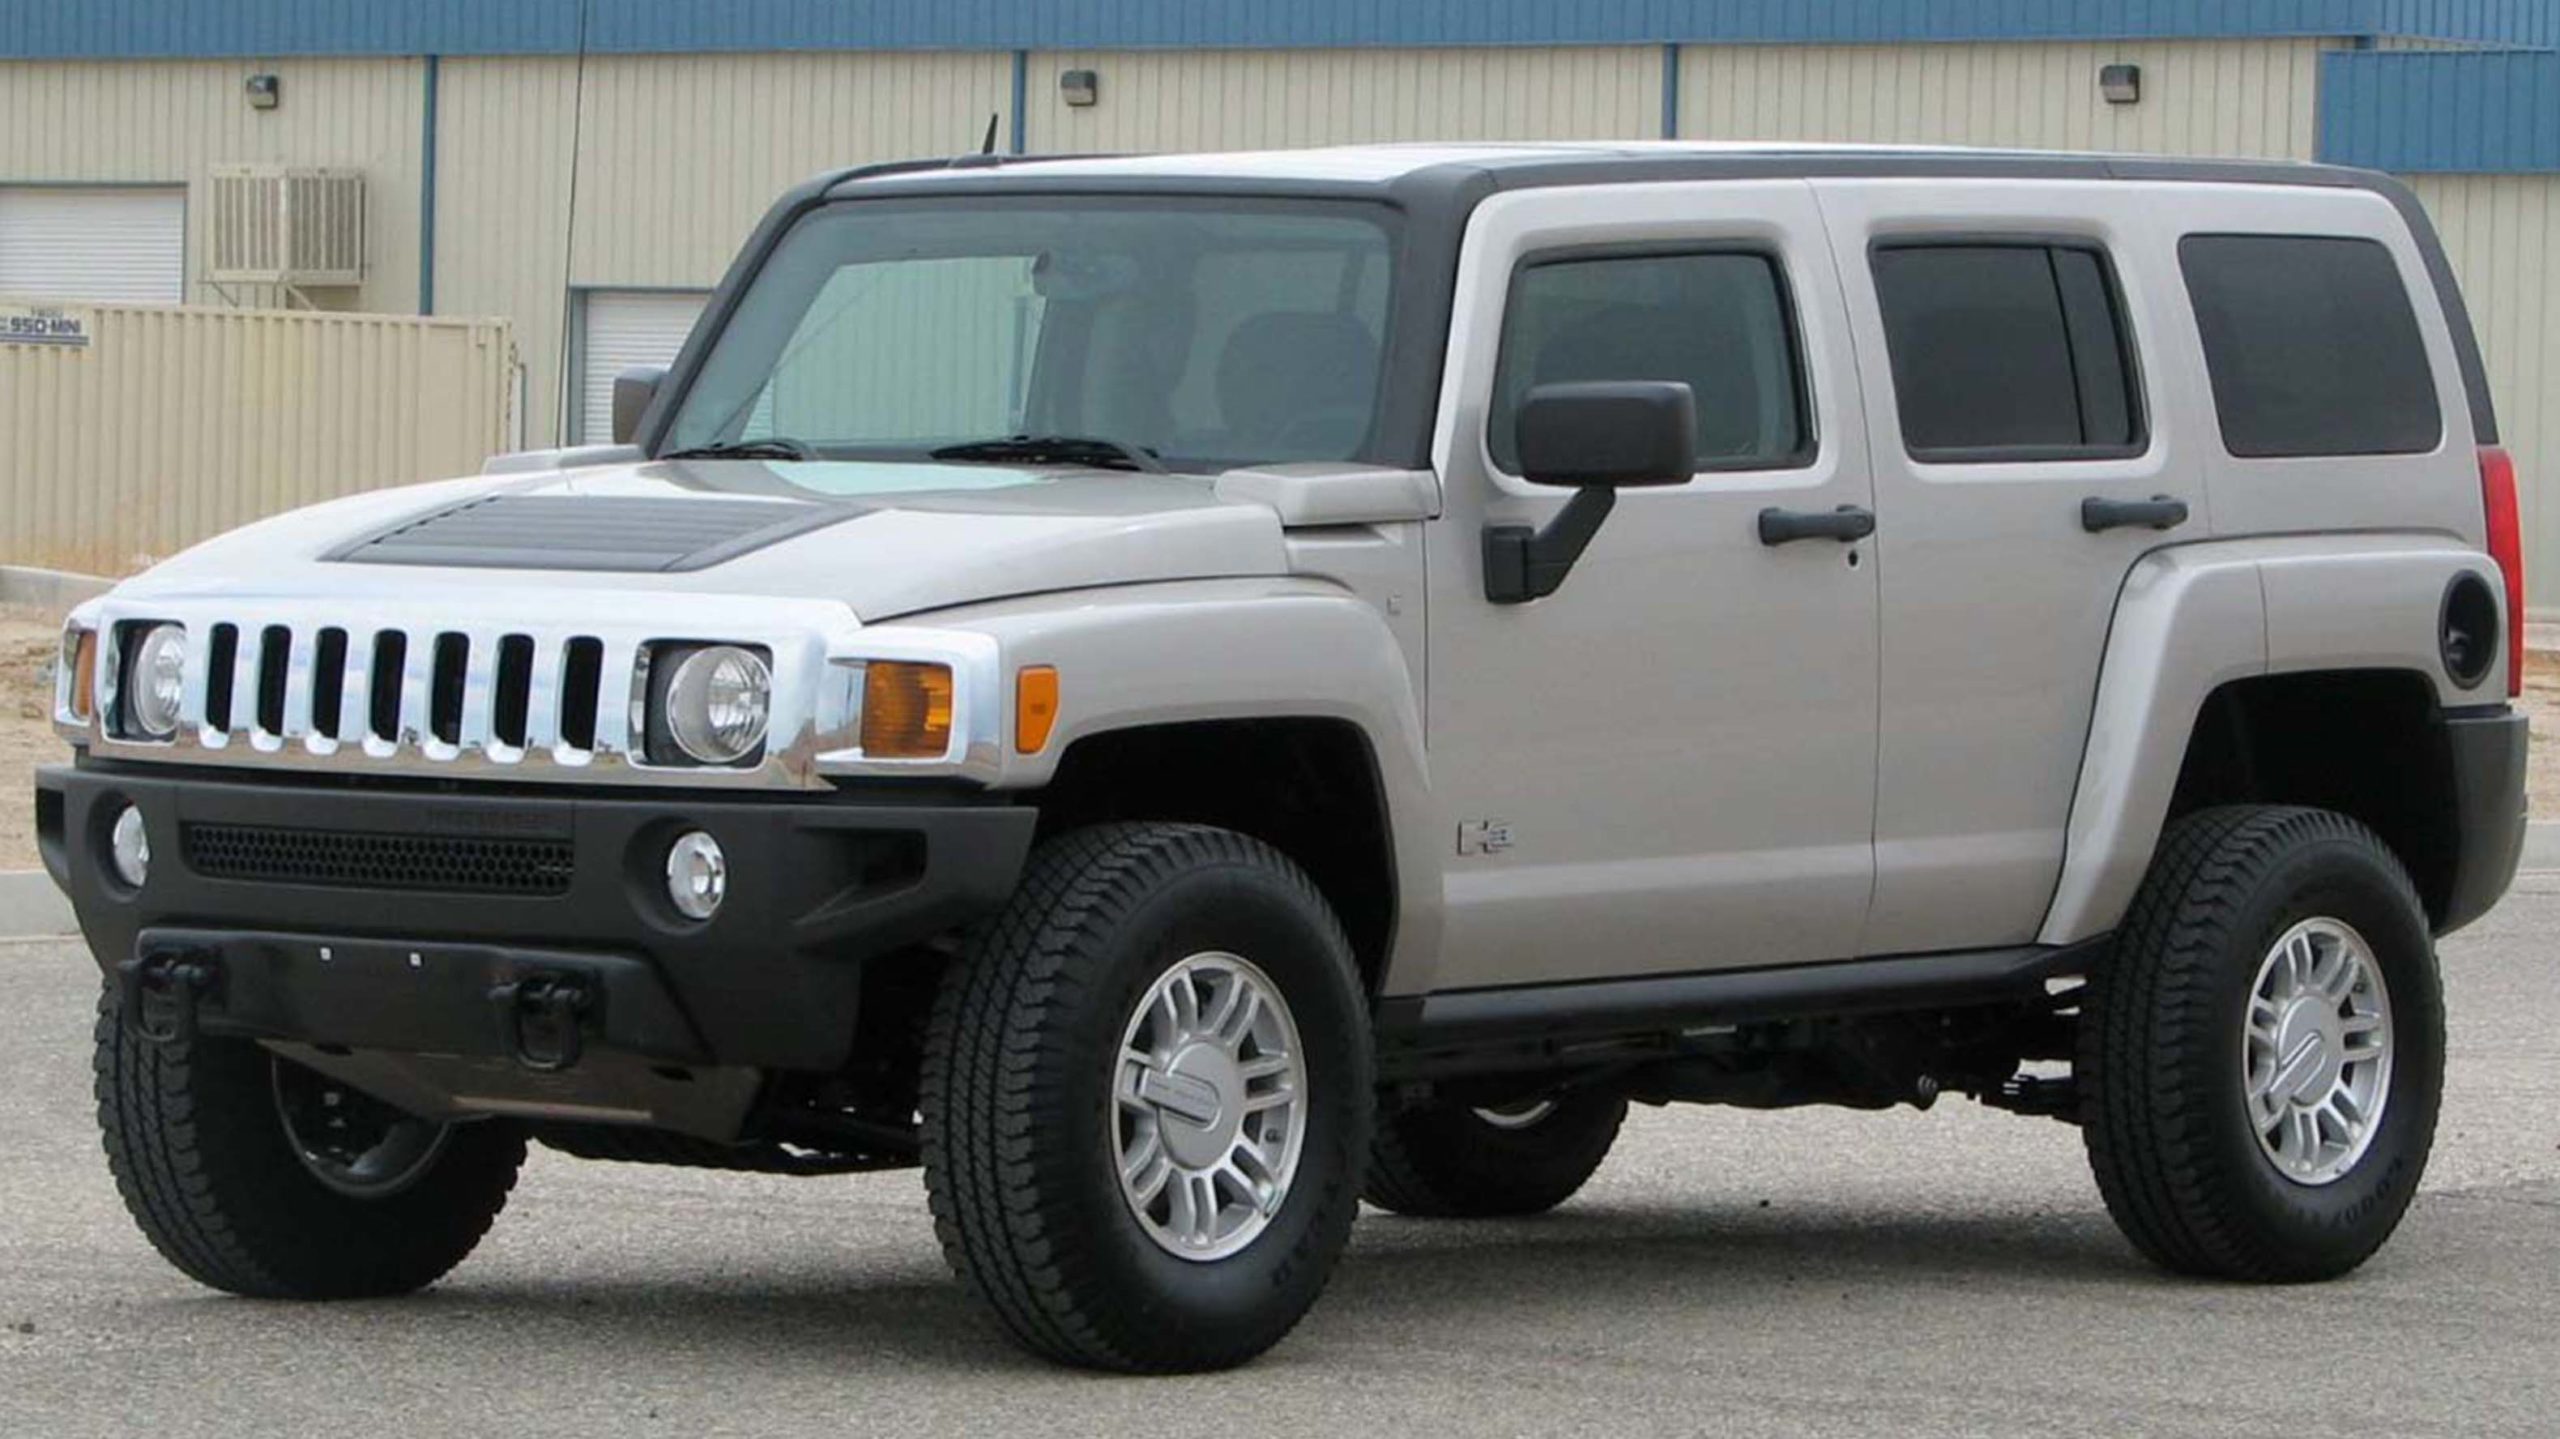 GM to revive Hummer brand with all-electric pickup truck